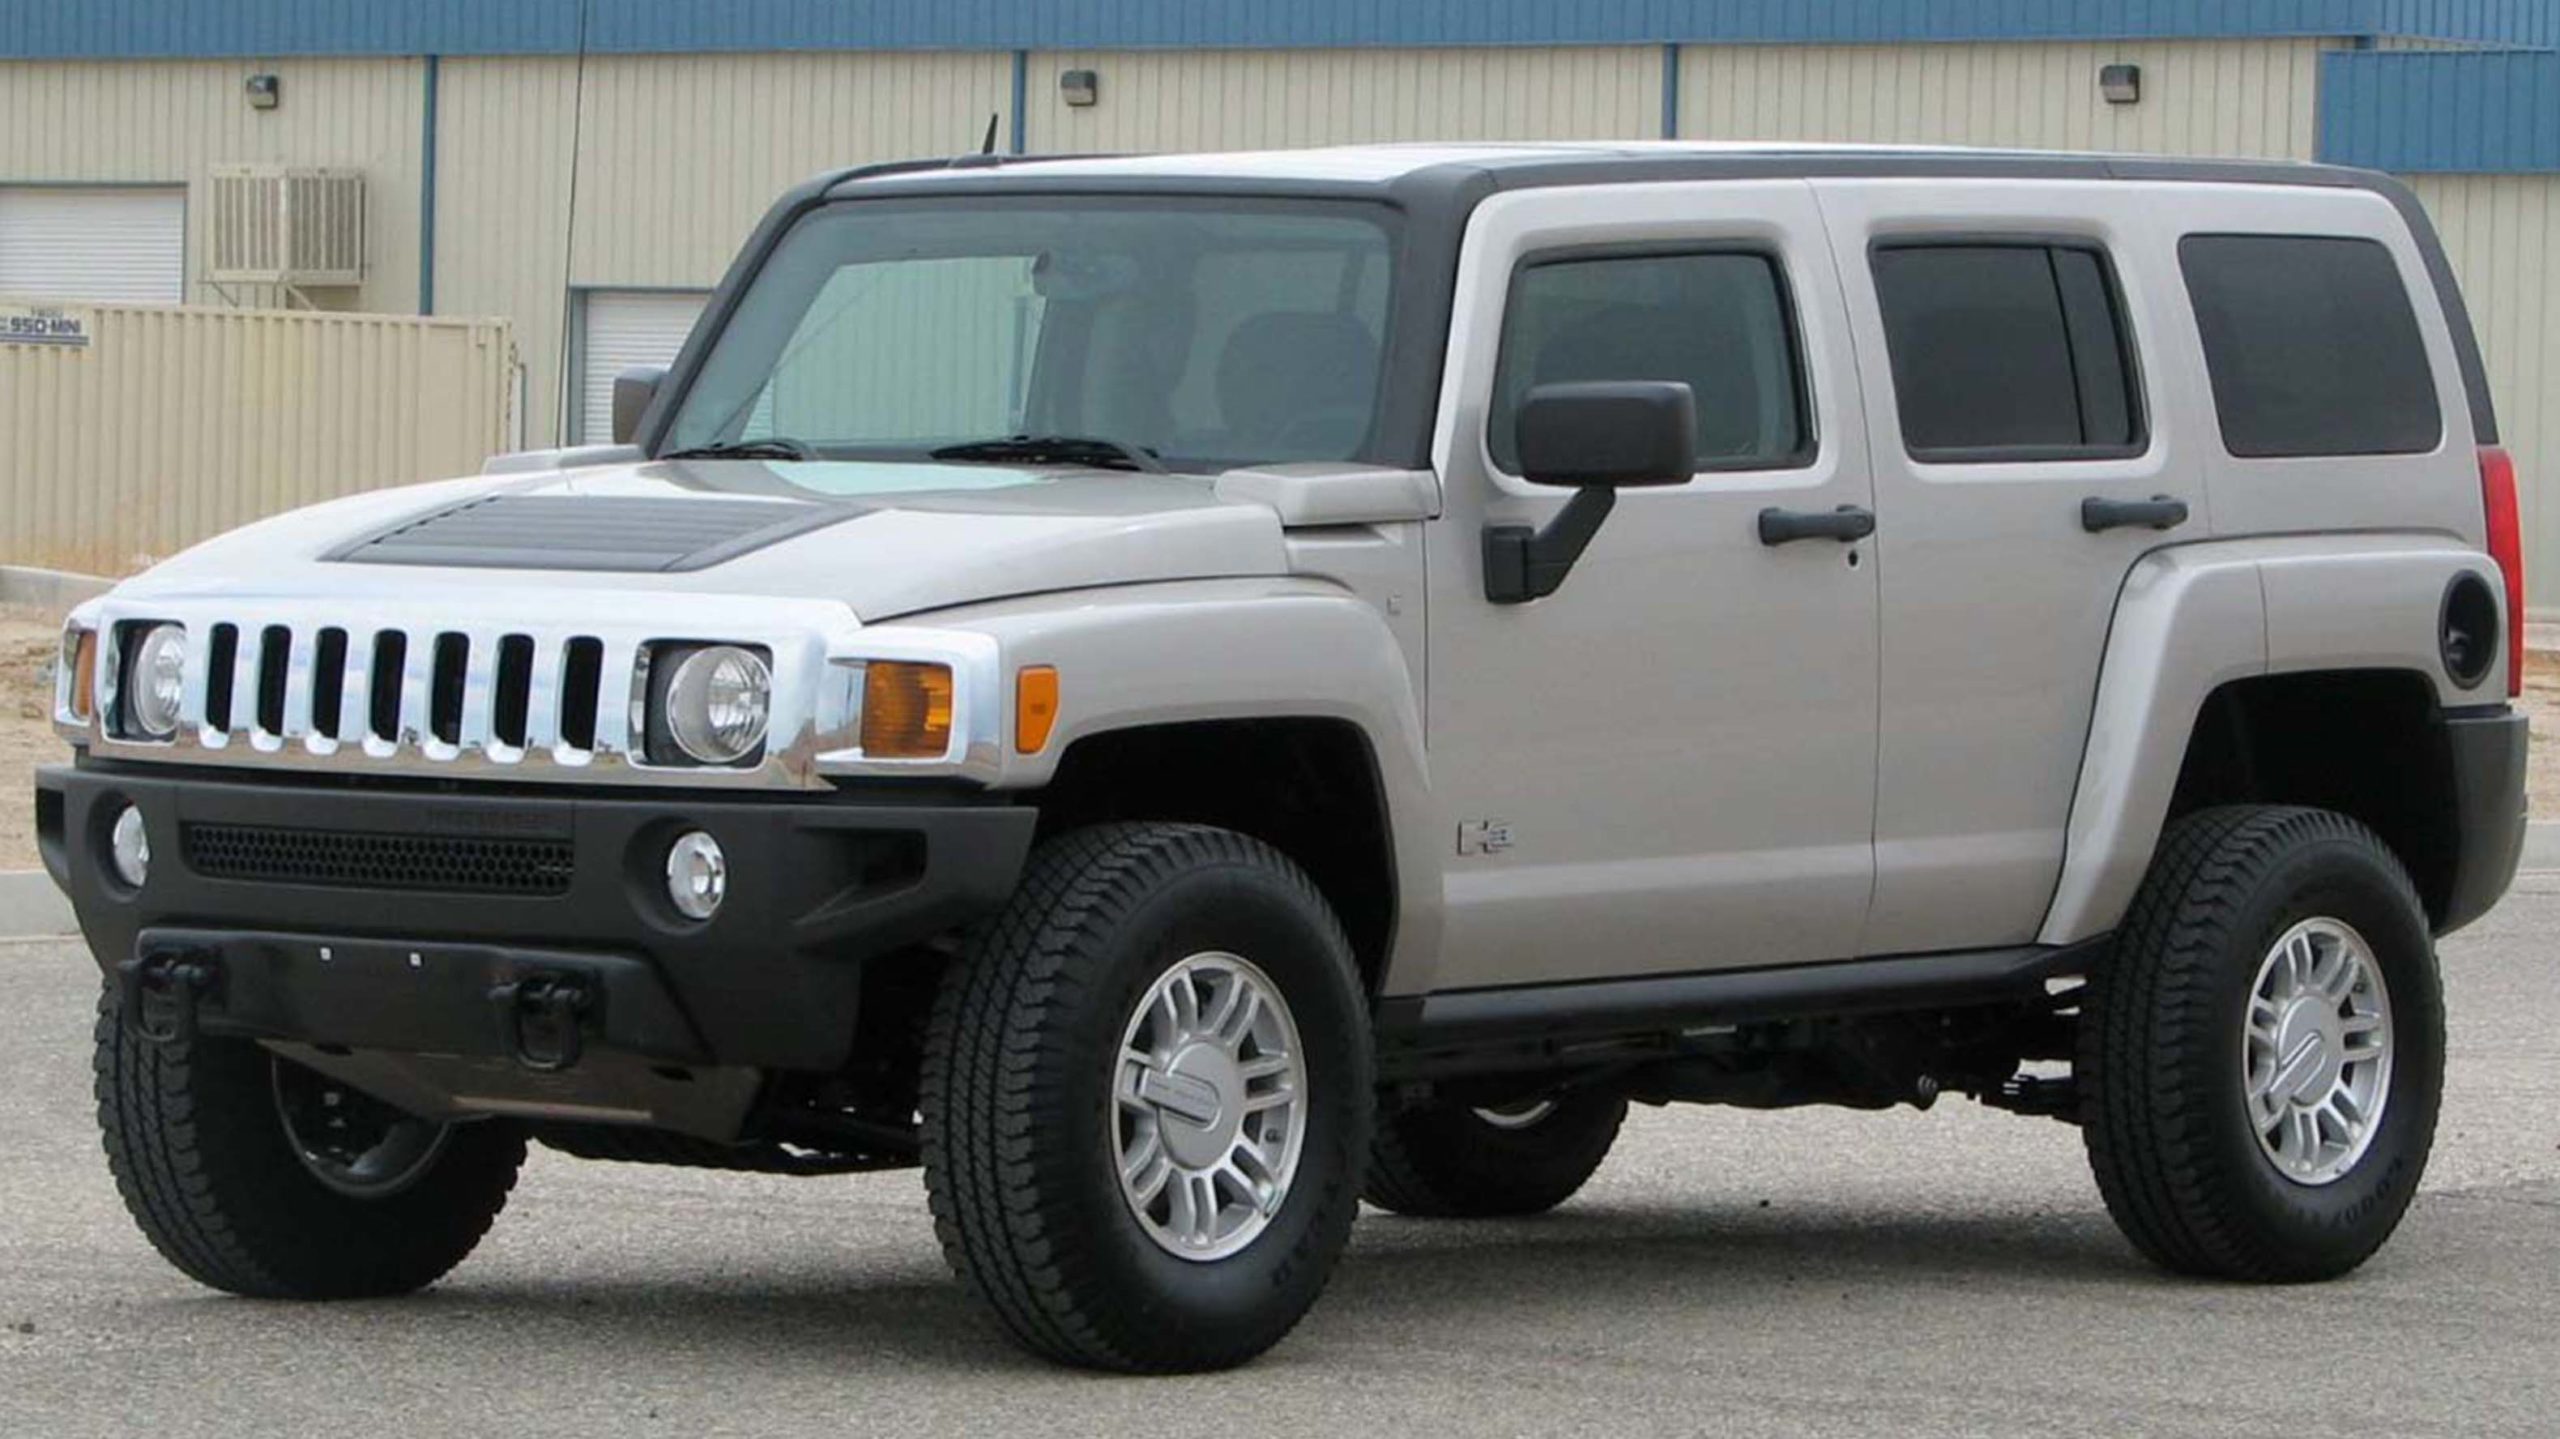 GM to revive Hummer brand with all-electric pickup truck